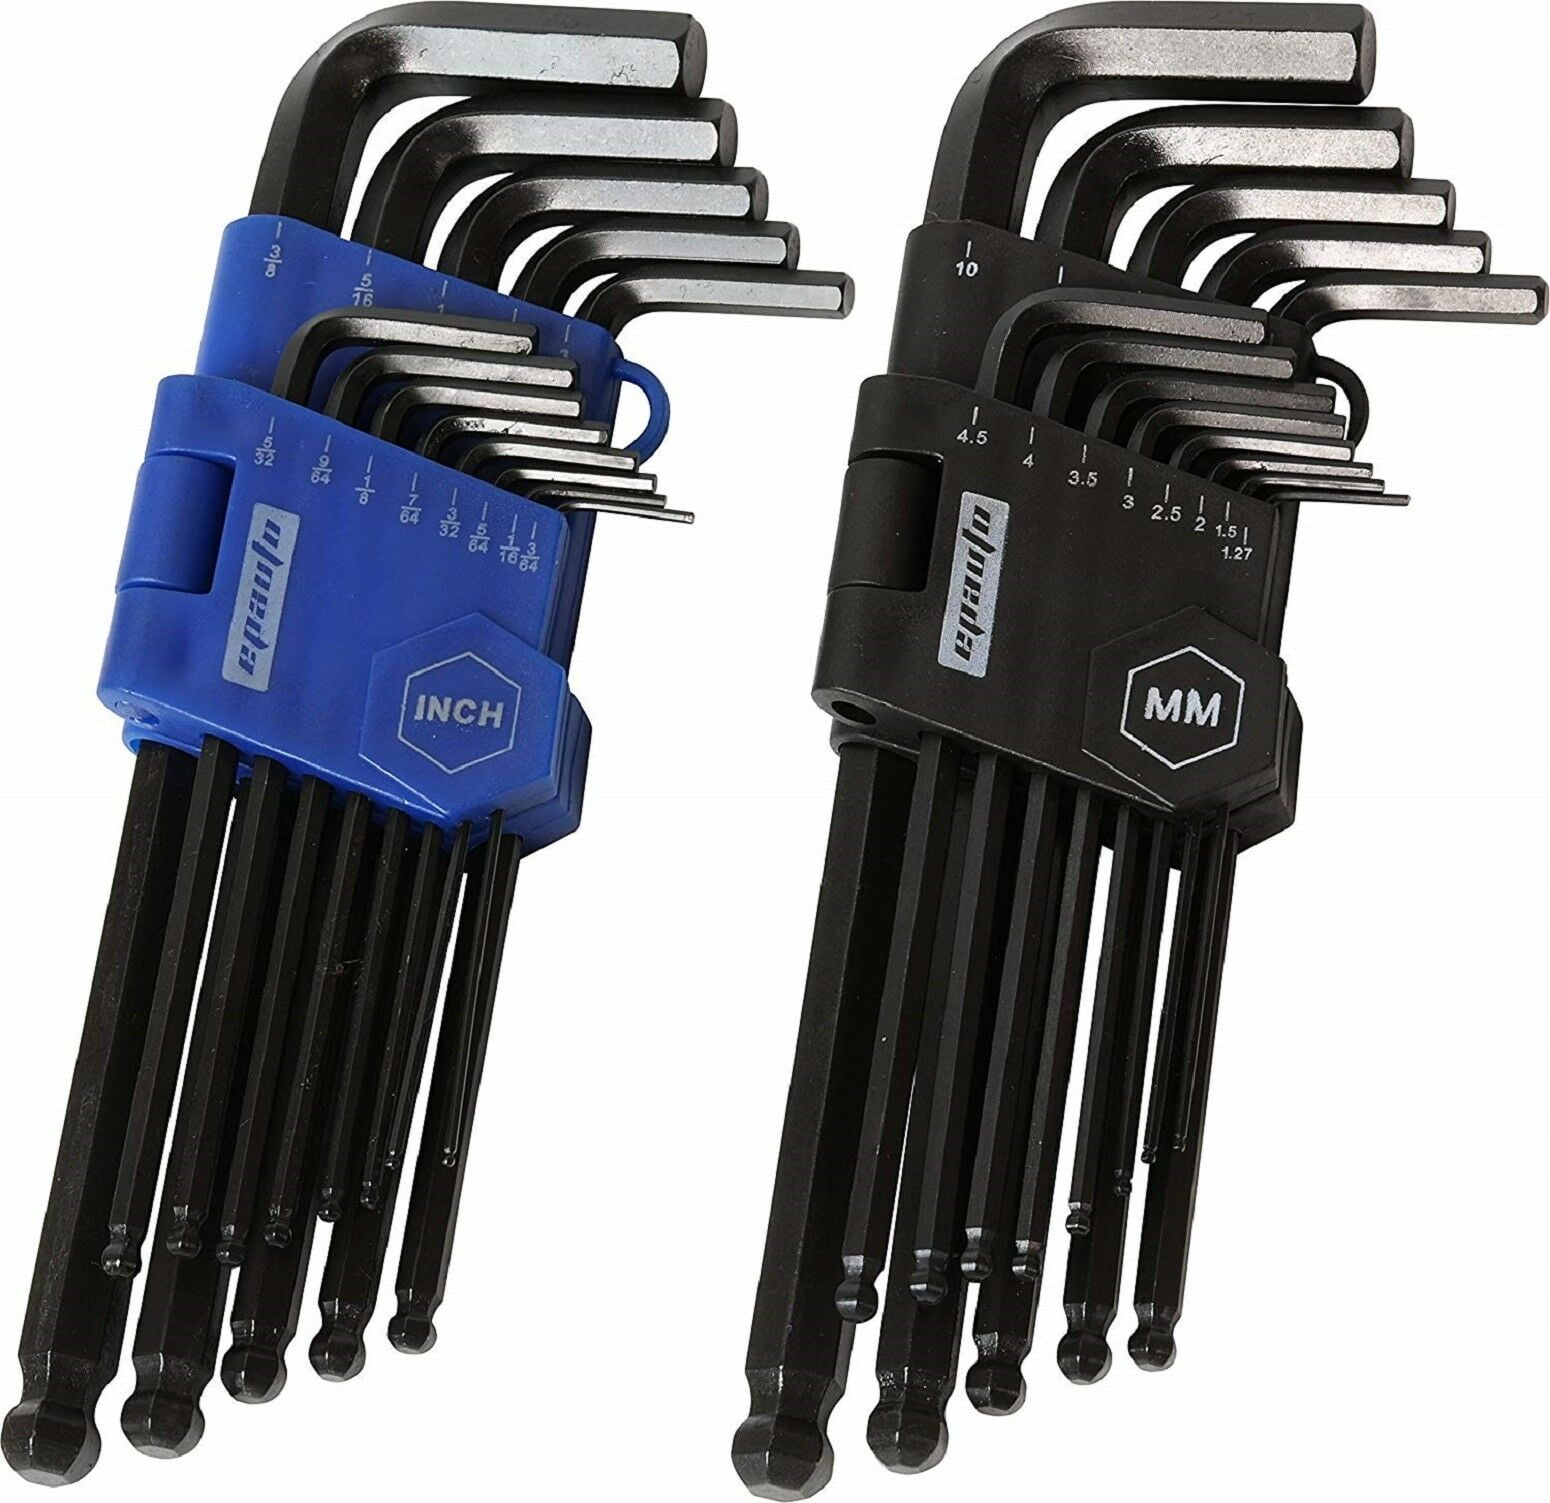 Details about   26-Piece Wrench Set Hex Key Set Tool Alan Hex Metric SAE Ball End Short Long Arm 